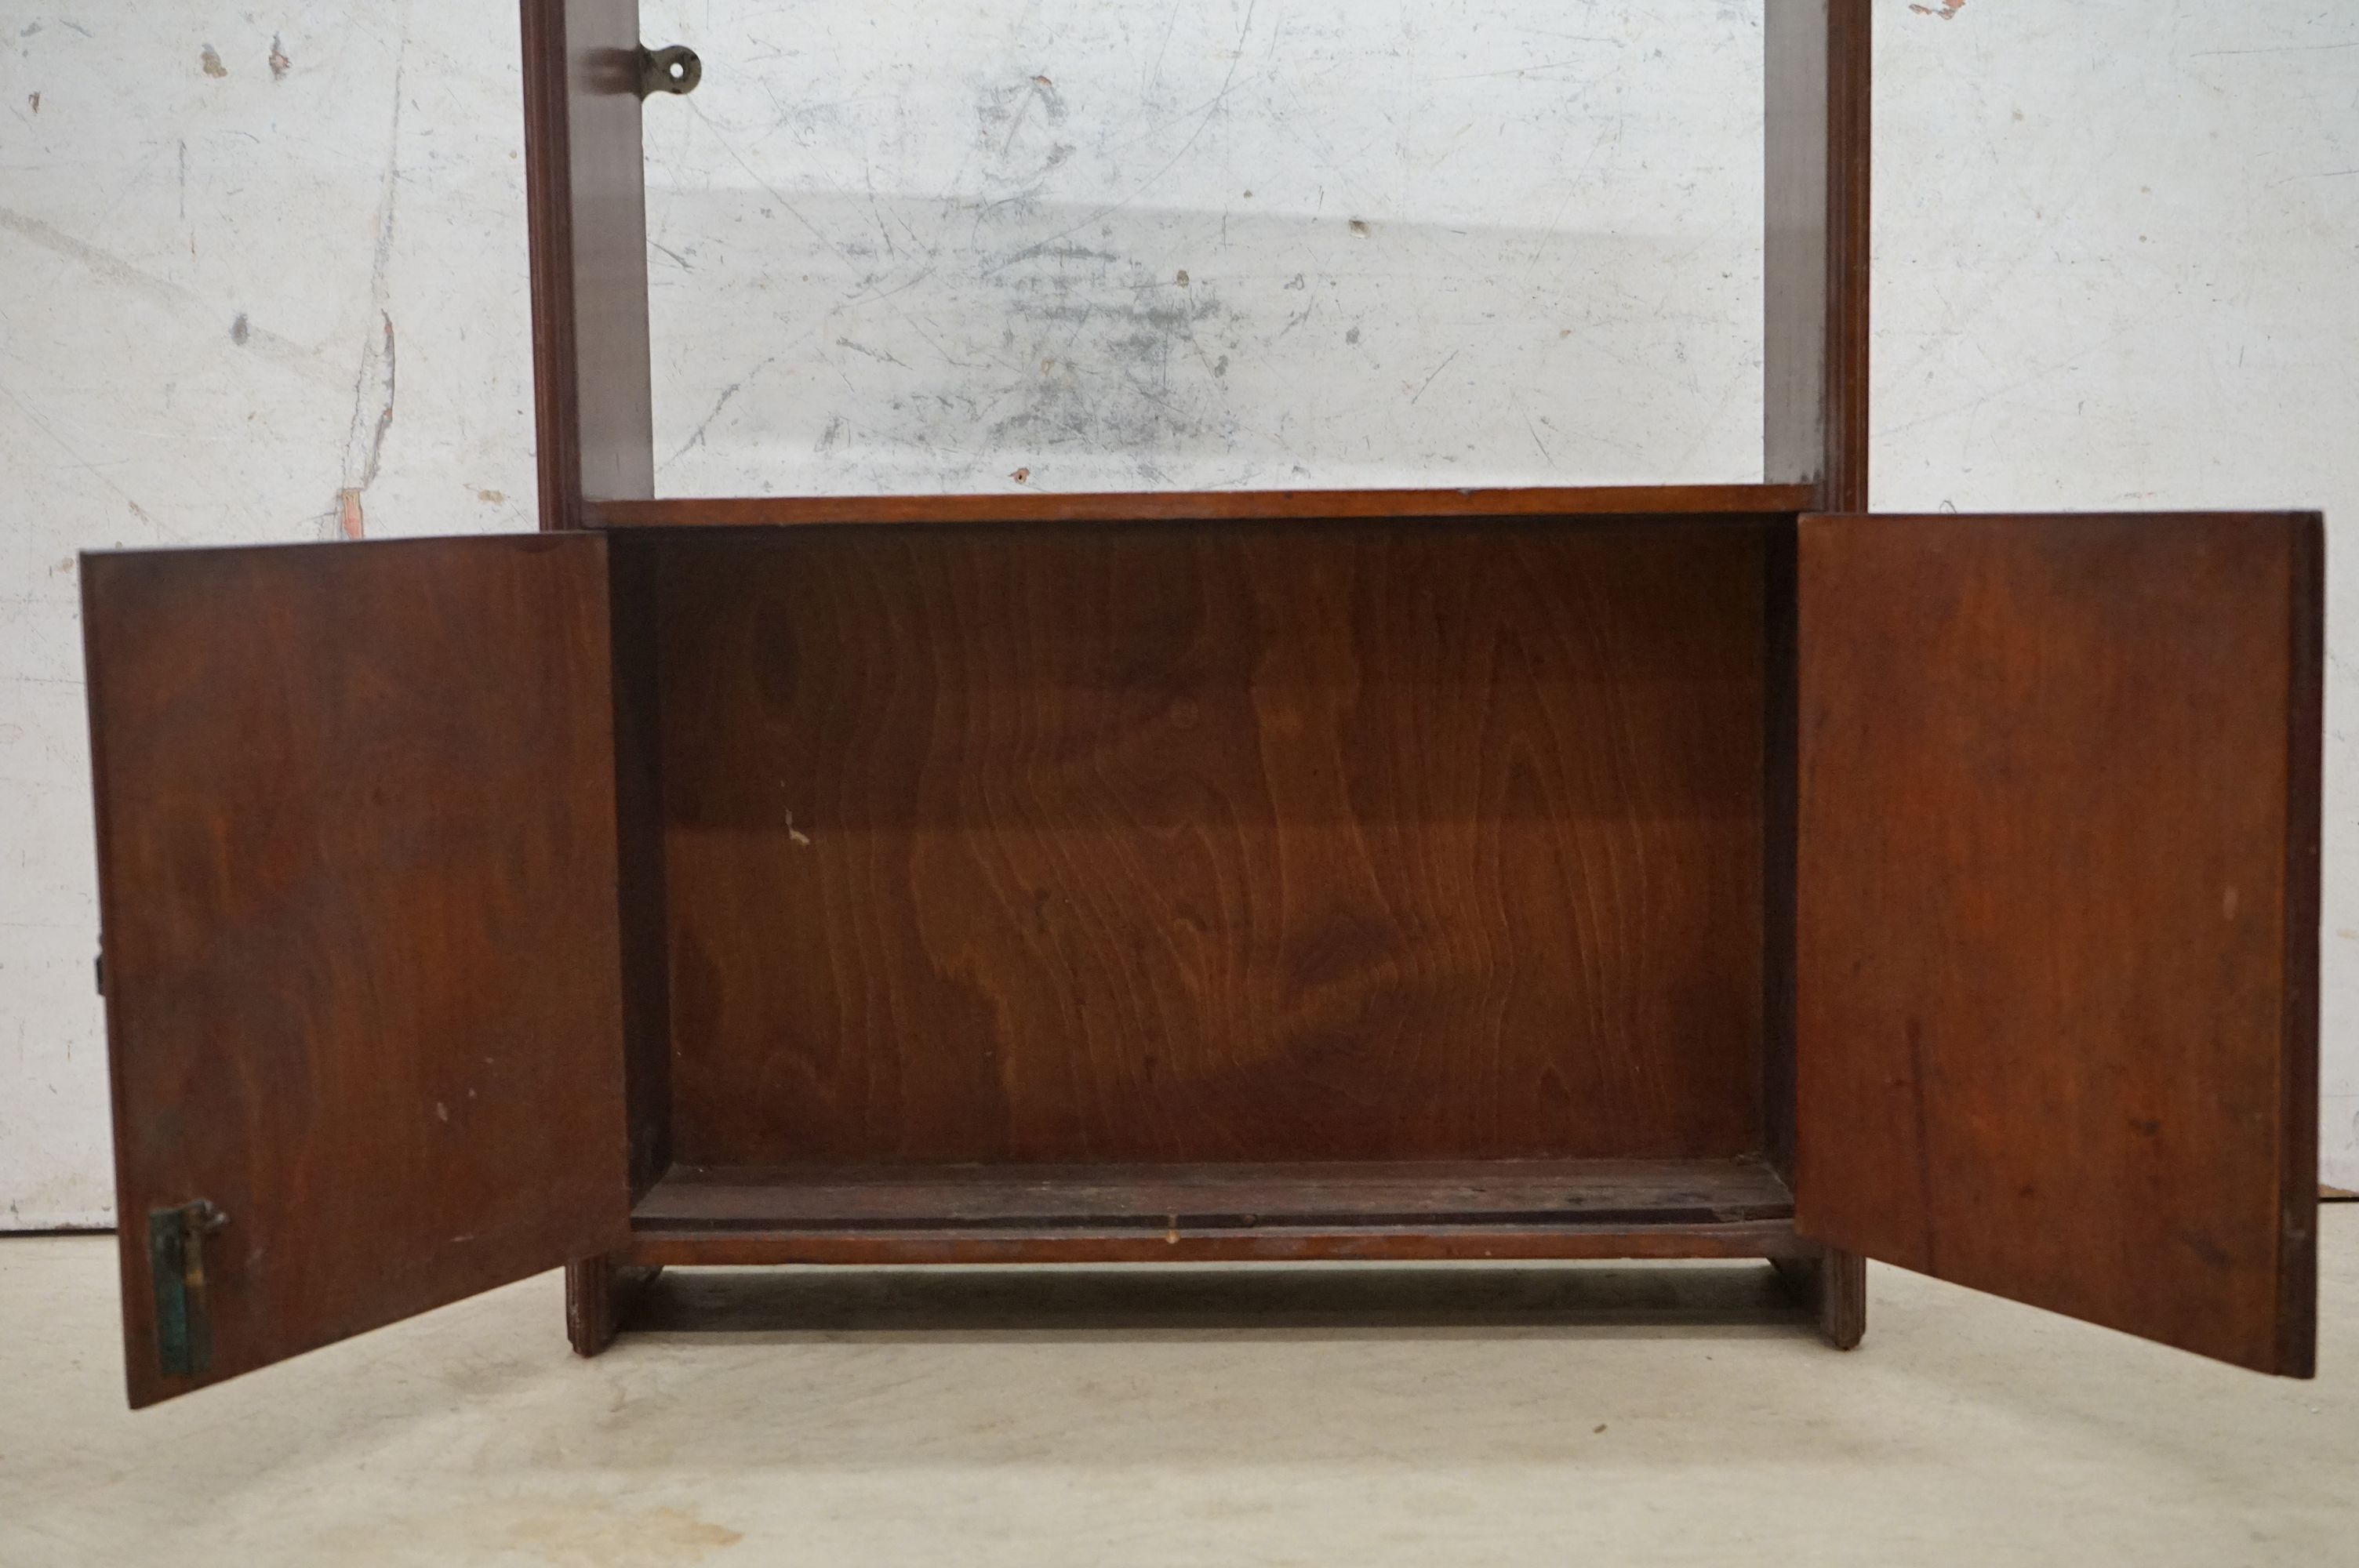 19th / Early 20th century Mahogany Hanging Wall Shelf and Cupboard, 48cm wide x 63cm high - Image 5 of 6